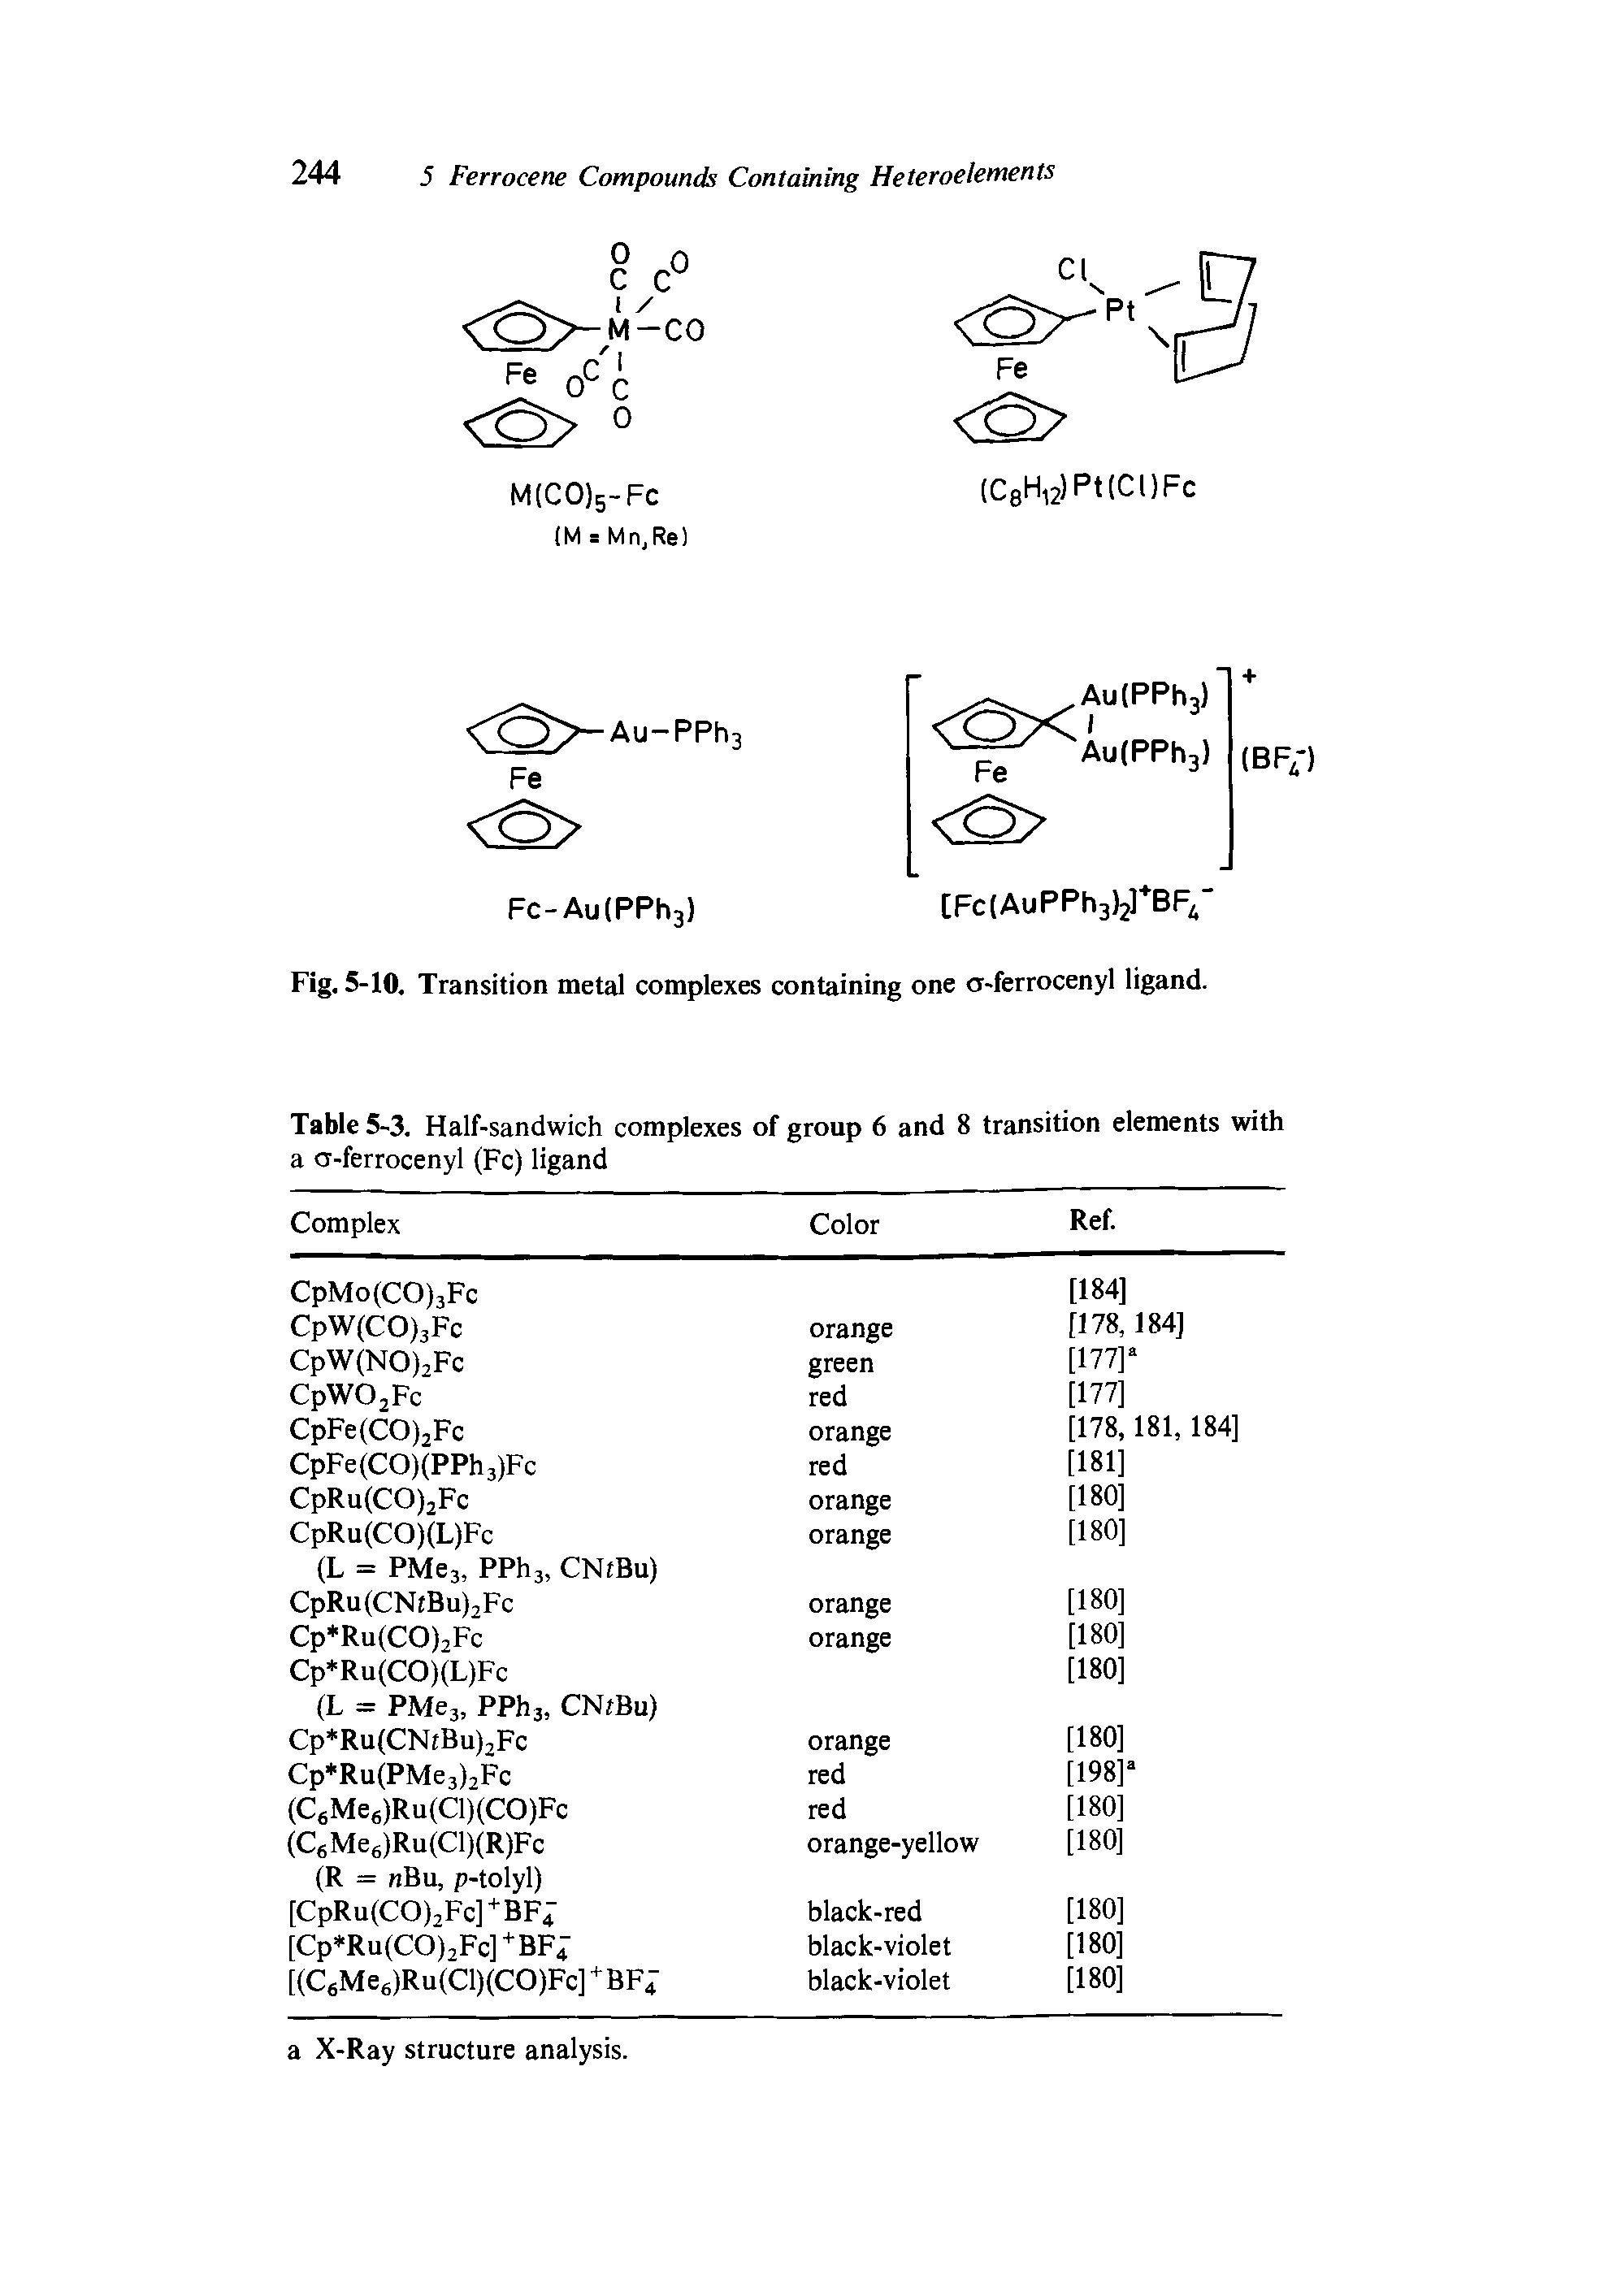 Fig. 5-10. Transition metal complexes containing one a-ferrocenyl ligand.